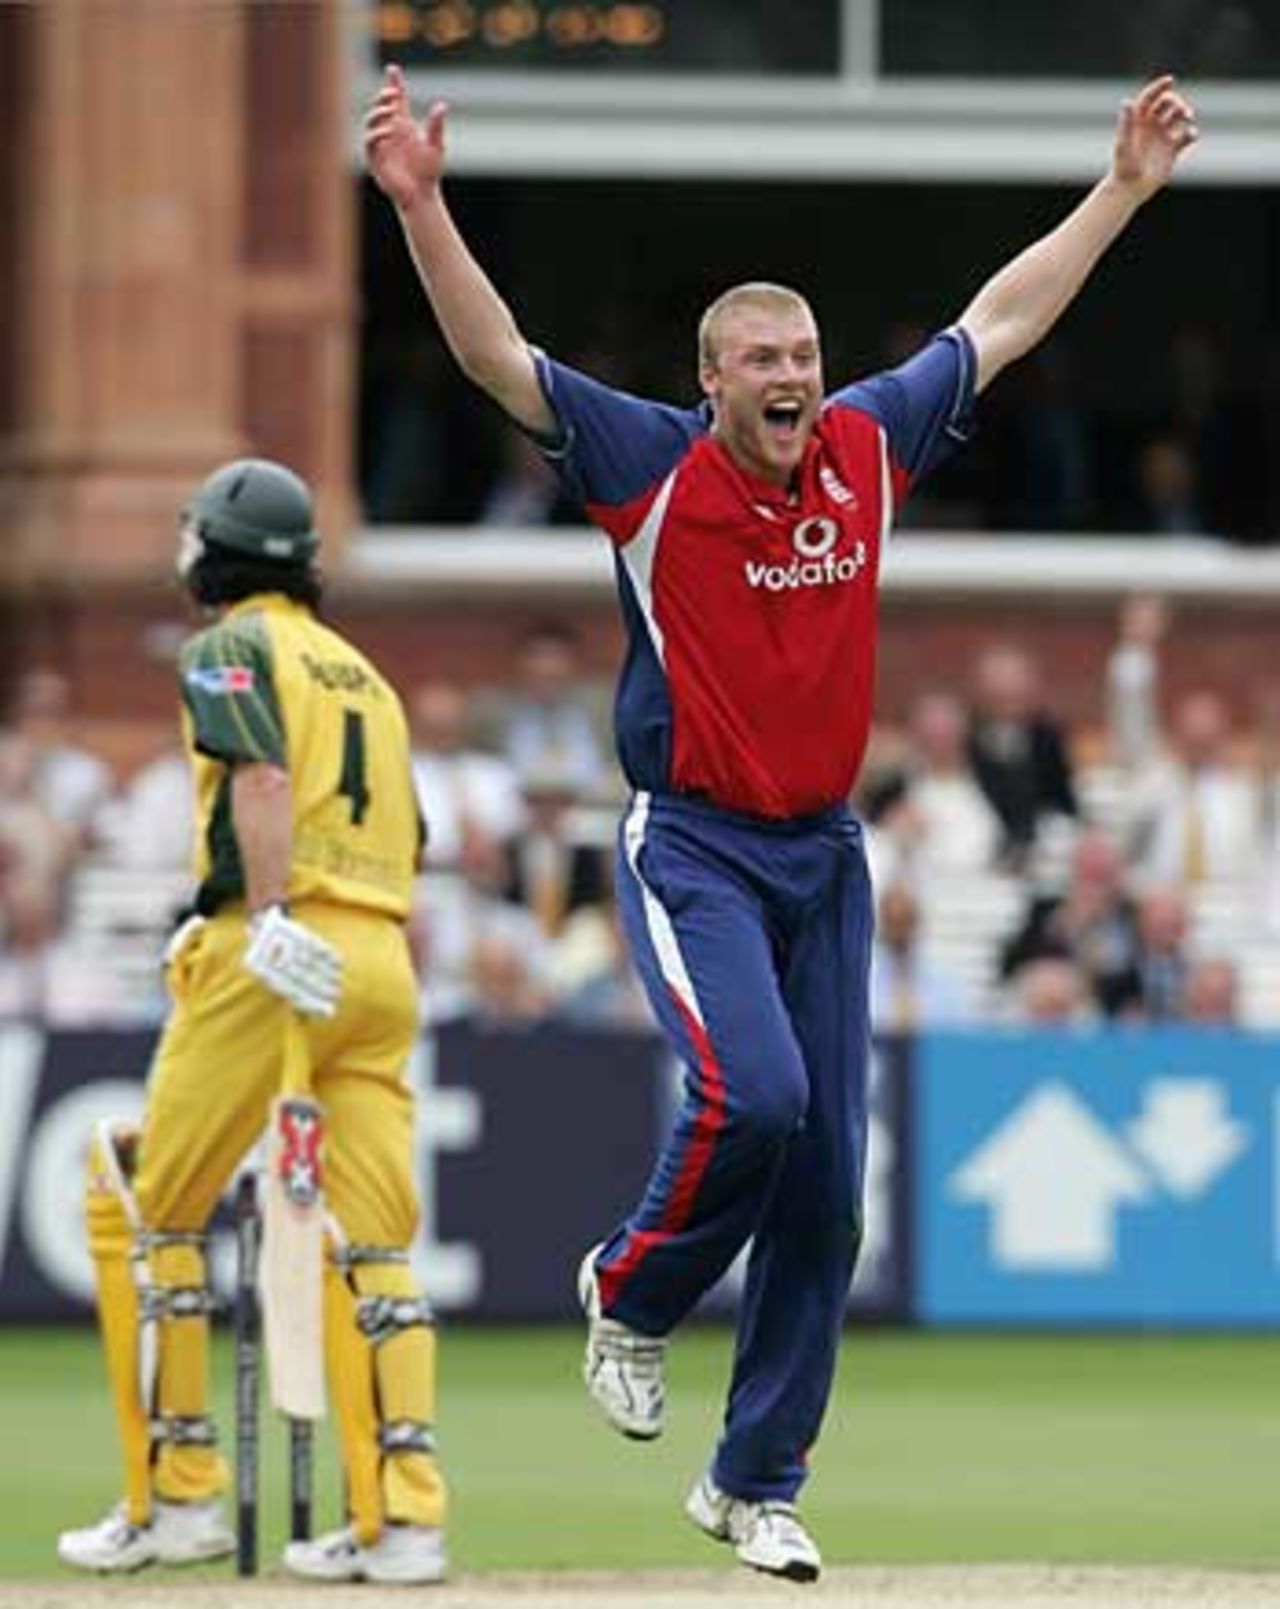 Andrew Flintoff dismisses Jason Gillespie for a first ball duck, England v Australia, NatWest Series final, Lord's, June 2